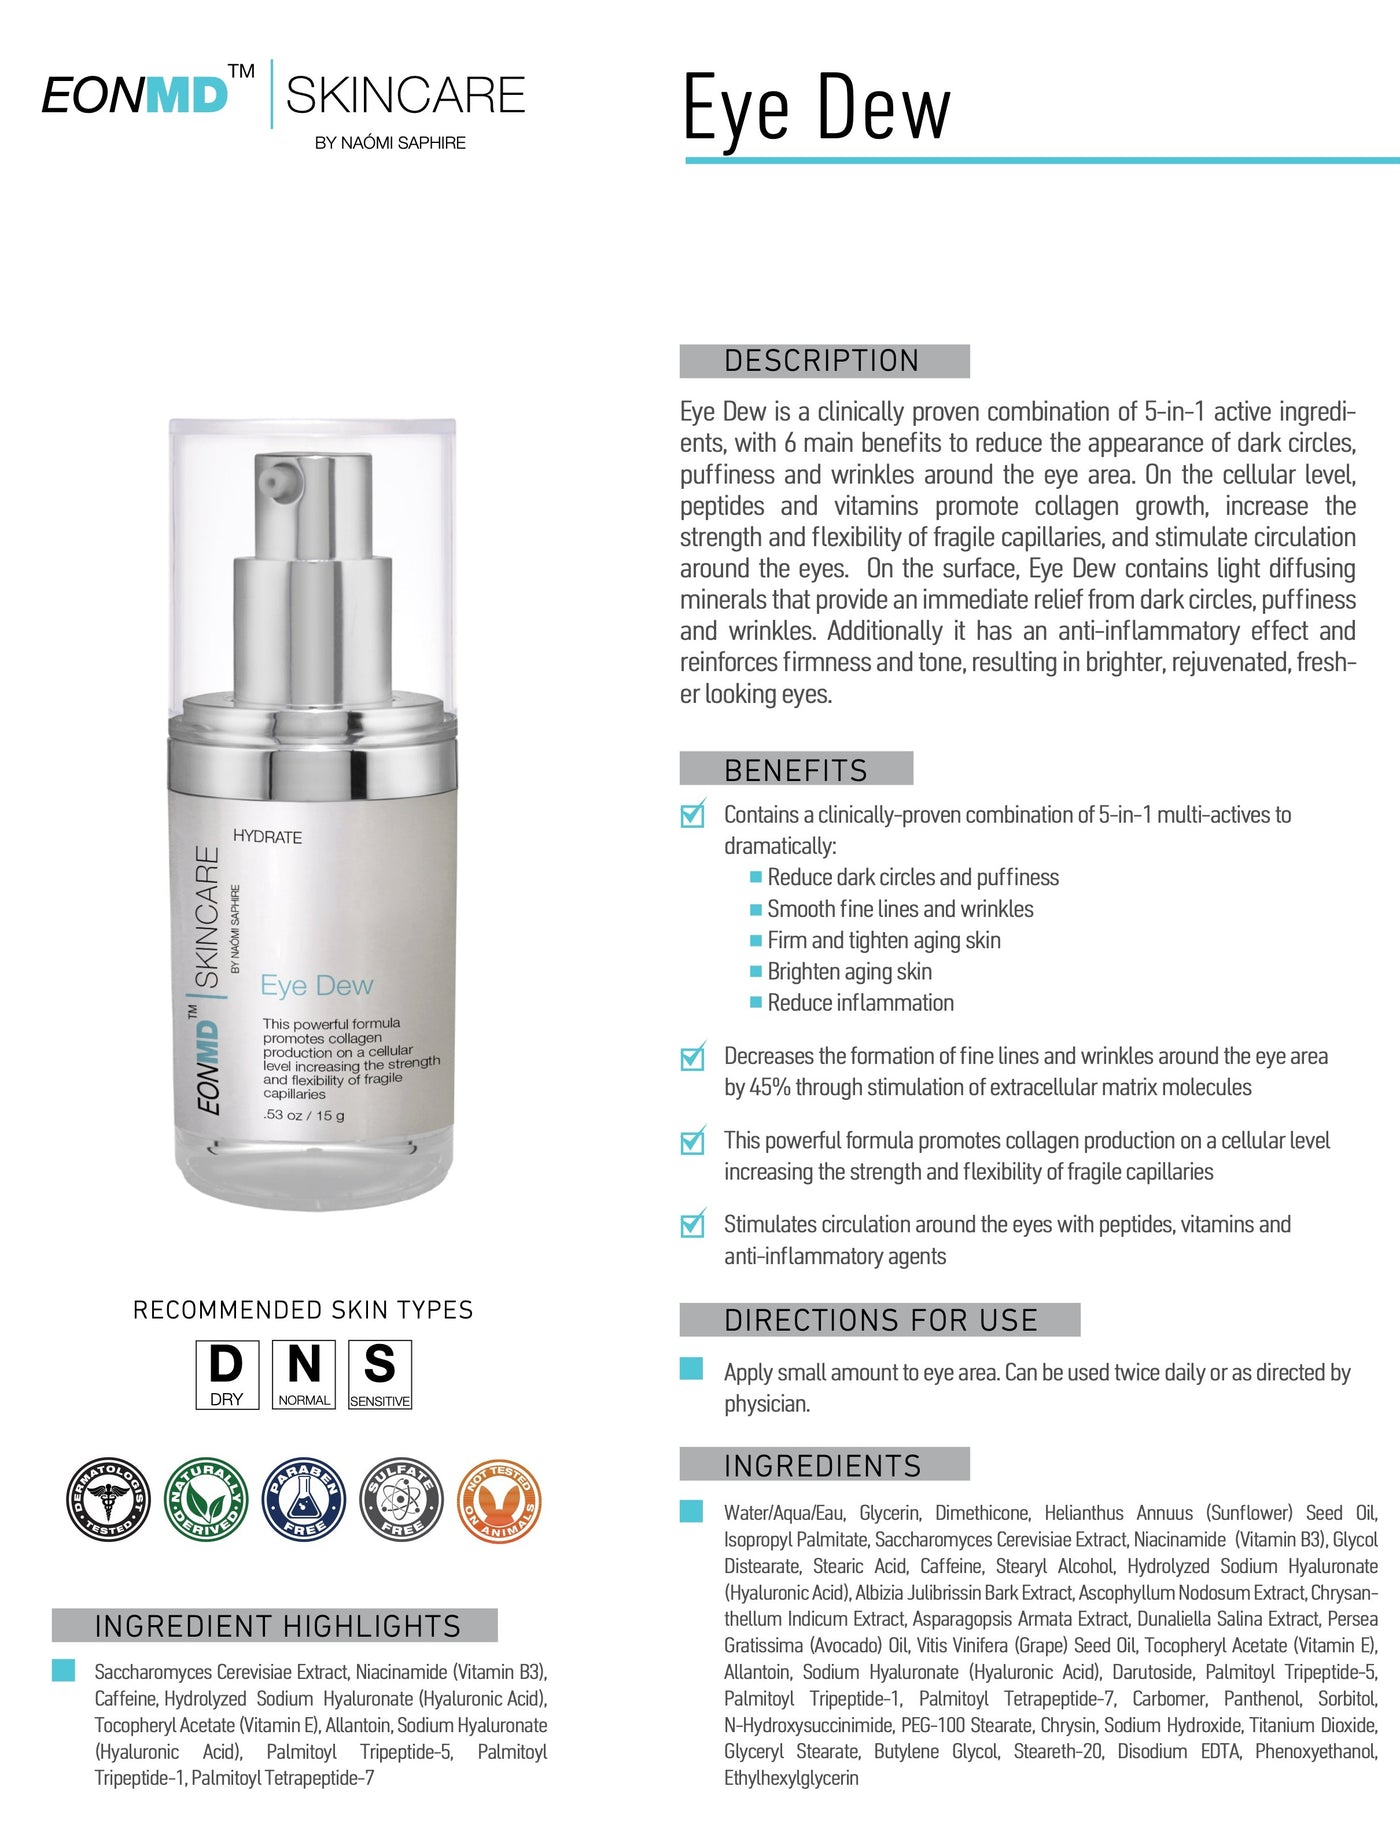 Eye Dew is a clinically proven combination of 5-in-1 active ingredi- ents, with 6 main benefits to reduce the appearance of dark circles, puffiness and wrinkles around the eye area. On the cellular level, peptides and vitamins promote collagen growth, increase the strength and flexibility of fragile capillaries, and stimulate circulation around the eyes.